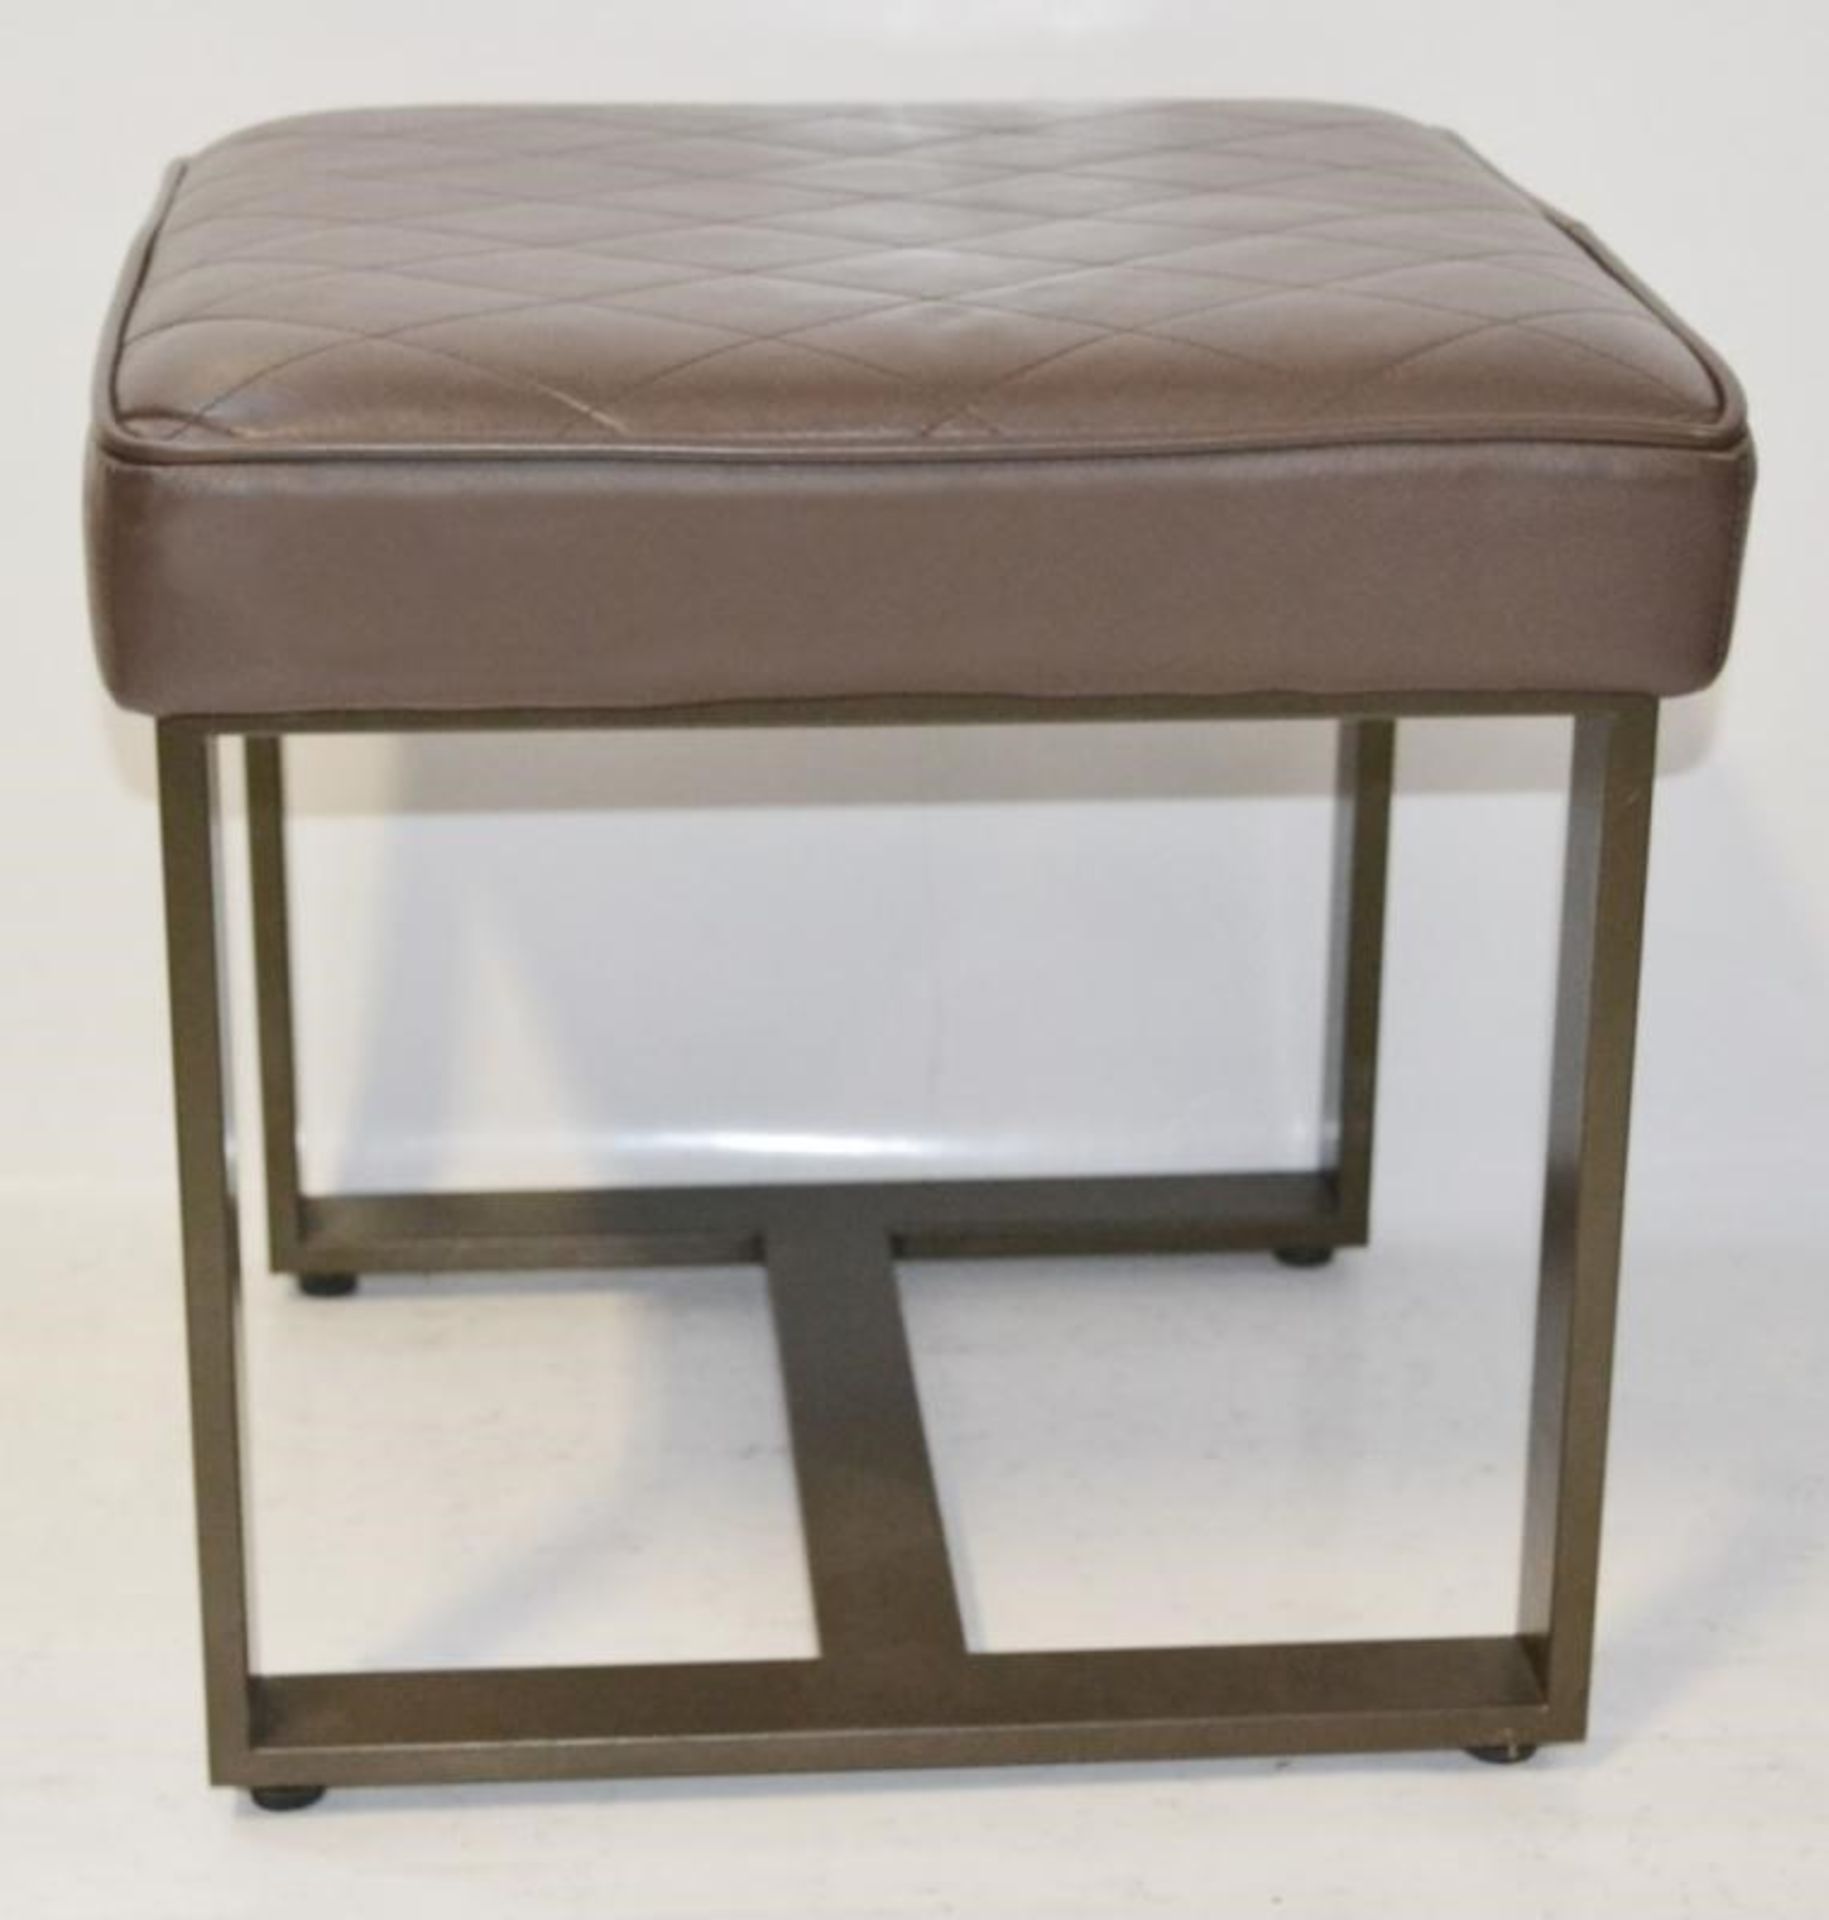 2 x Contemporary Seat Stools With Brown Faux Leather Cushioned Seat Pads - Image 3 of 5